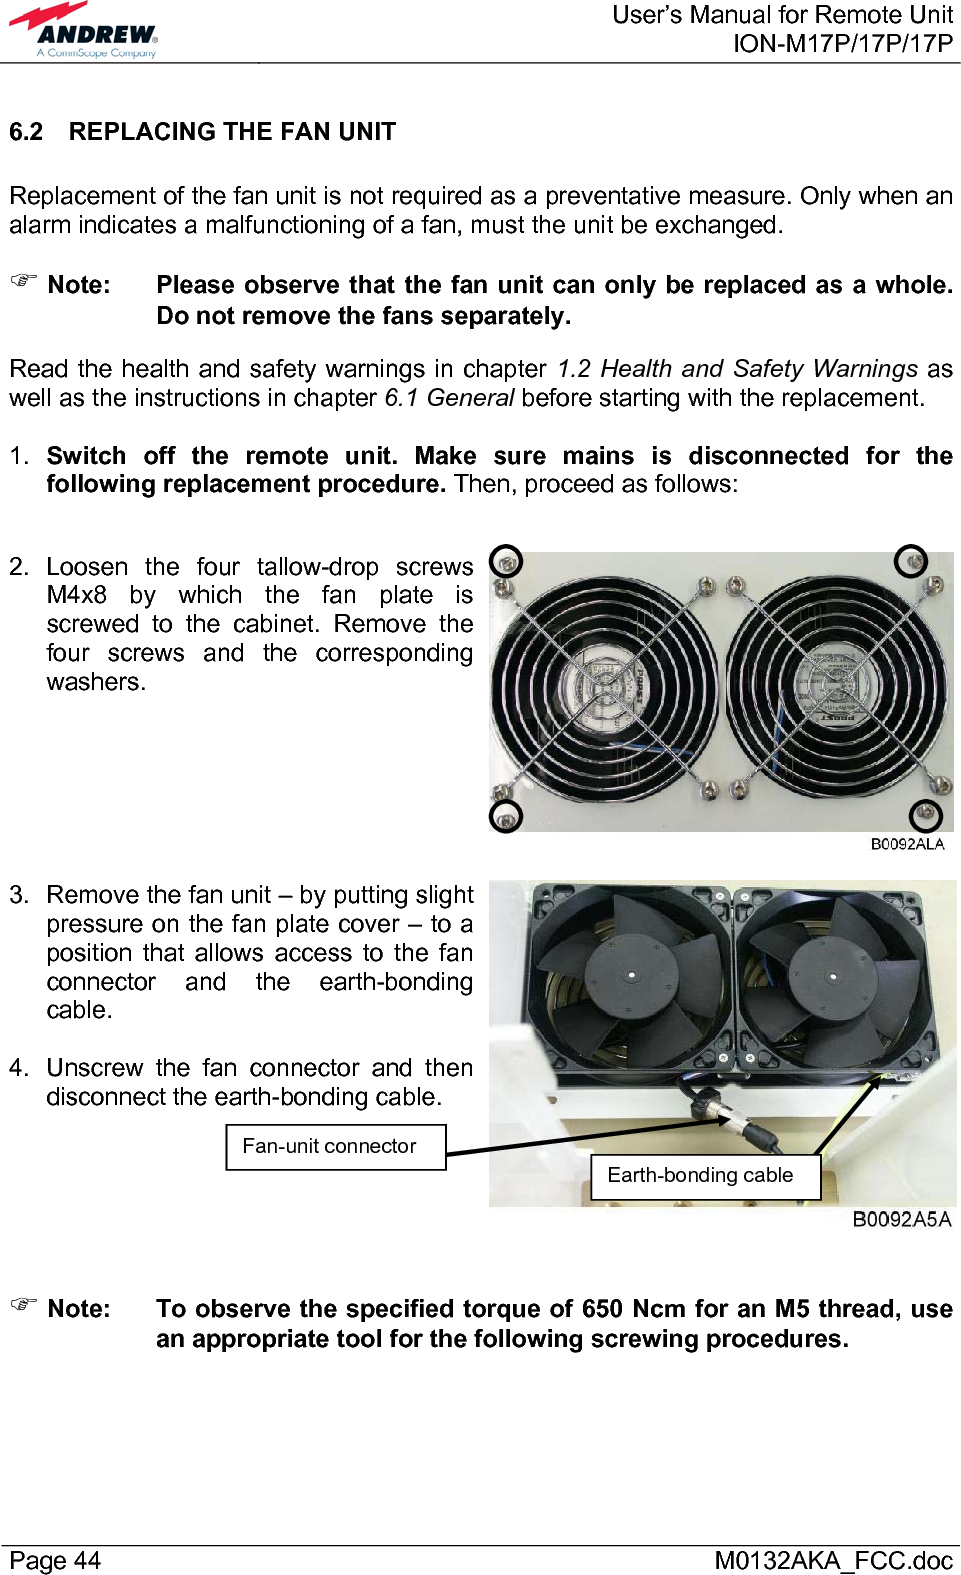  User’s Manual for Remote UnitION-M17P/17P/17P Page 44      M0132AKA_FCC.doc 6.2  REPLACING THE FAN UNIT  Replacement of the fan unit is not required as a preventative measure. Only when an alarm indicates a malfunctioning of a fan, must the unit be exchanged. ) Note:  Please observe that the fan unit can only be replaced as a whole. Do not remove the fans separately. Read the health and safety warnings in chapter 1.2 Health and Safety Warnings as well as the instructions in chapter 6.1 General before starting with the replacement.   1.  Switch off the remote unit. Make sure mains is disconnected for the following replacement procedure. Then, proceed as follows:  2. Loosen the four tallow-drop screws M4x8 by which the fan plate is screwed to the cabinet. Remove the four screws and the corresponding washers.    3.  Remove the fan unit – by putting slight pressure on the fan plate cover – to a position that allows access to the fan connector and the earth-bonding cable.   4.  Unscrew the fan connector and then disconnect the earth-bonding cable.    ) Note:  To observe the specified torque of 650 Ncm for an M5 thread, use an appropriate tool for the following screwing procedures. Fan-unit connector Earth-bonding cable 